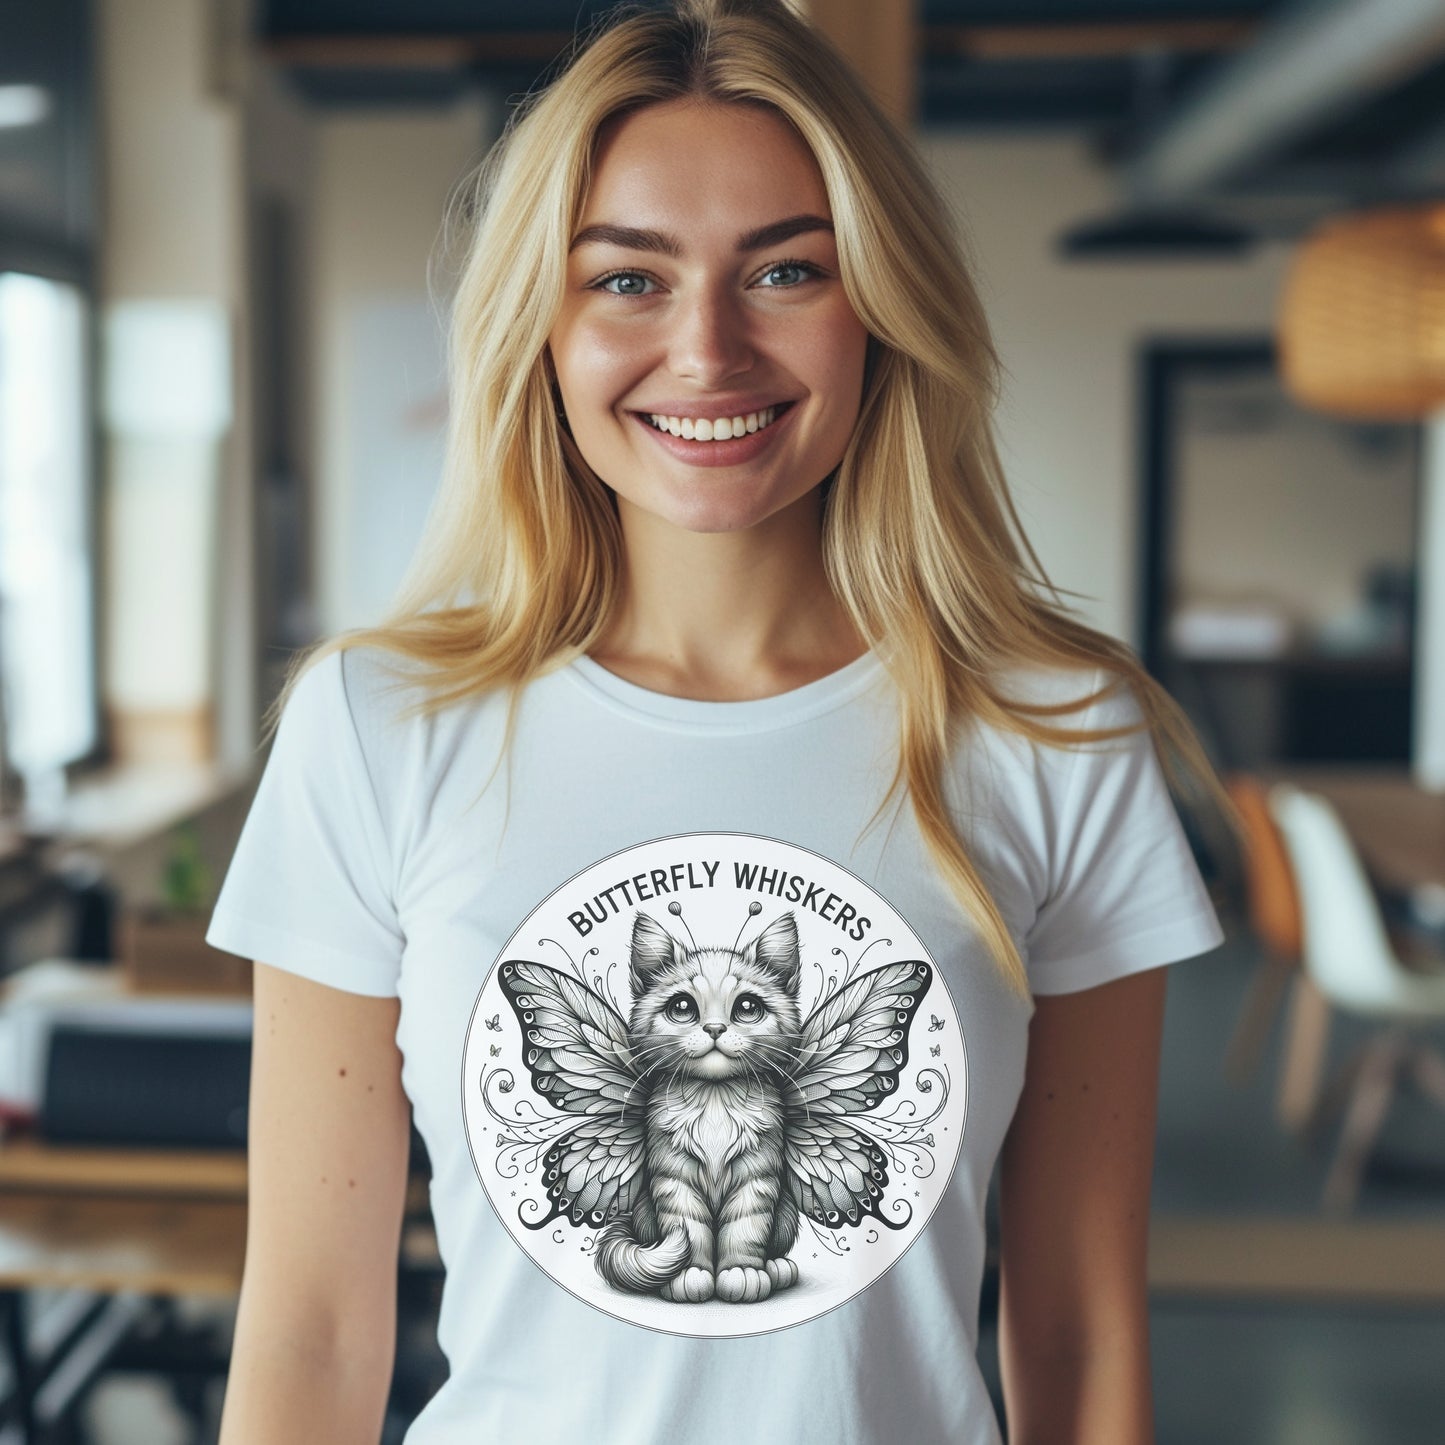 Fly into Whimsy with the Butterfly-Winged Cat T-Shirt. Perfect Cat Lover T-Shirt, Fantasy Winged Cat, Fantasy Cat T-Shirt, Winged Cat Shirt